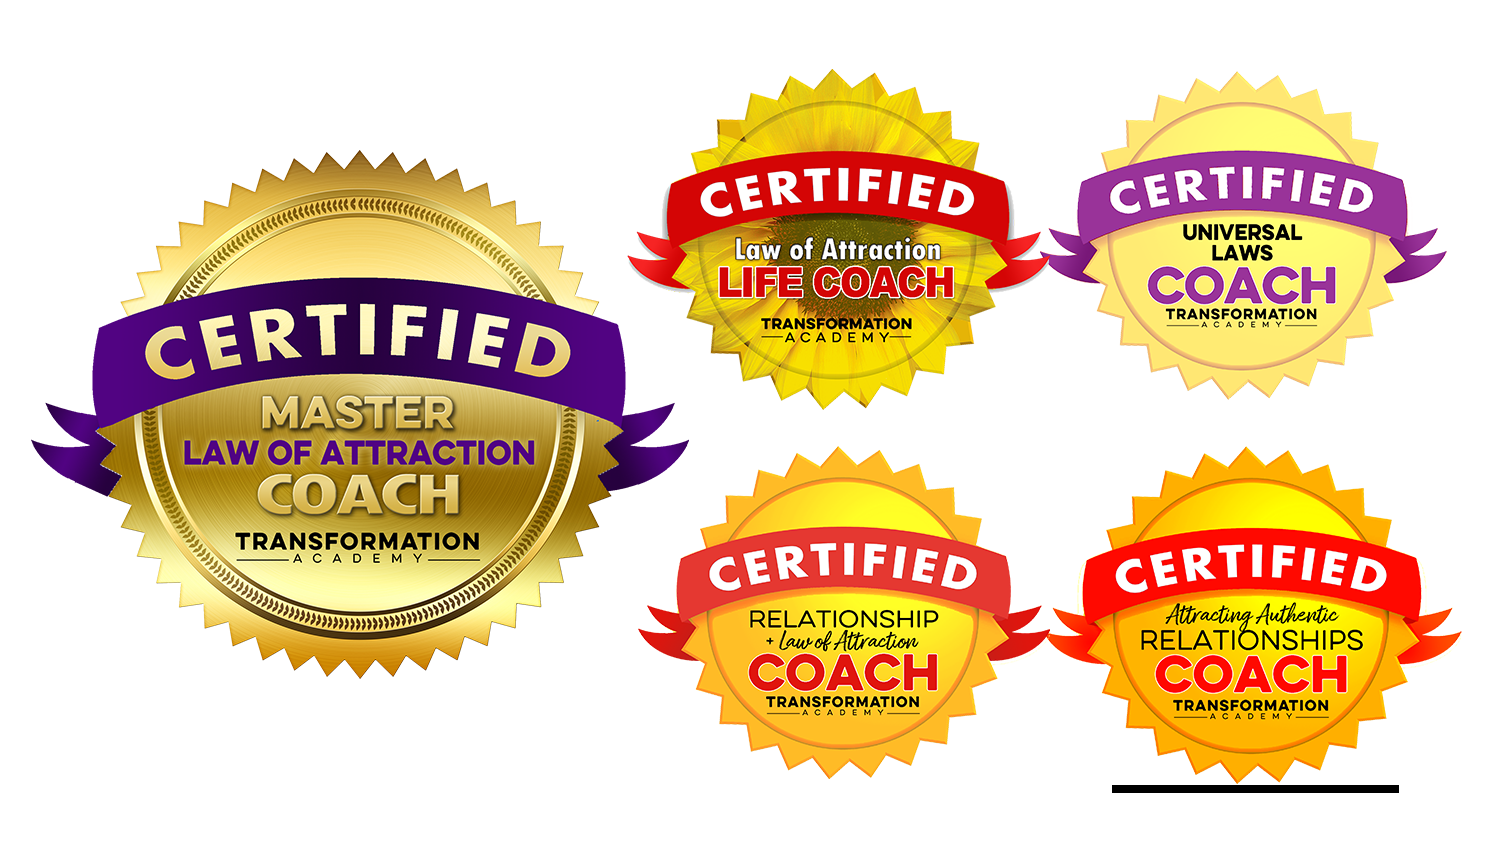 Master Law of Attraction Coach Certification